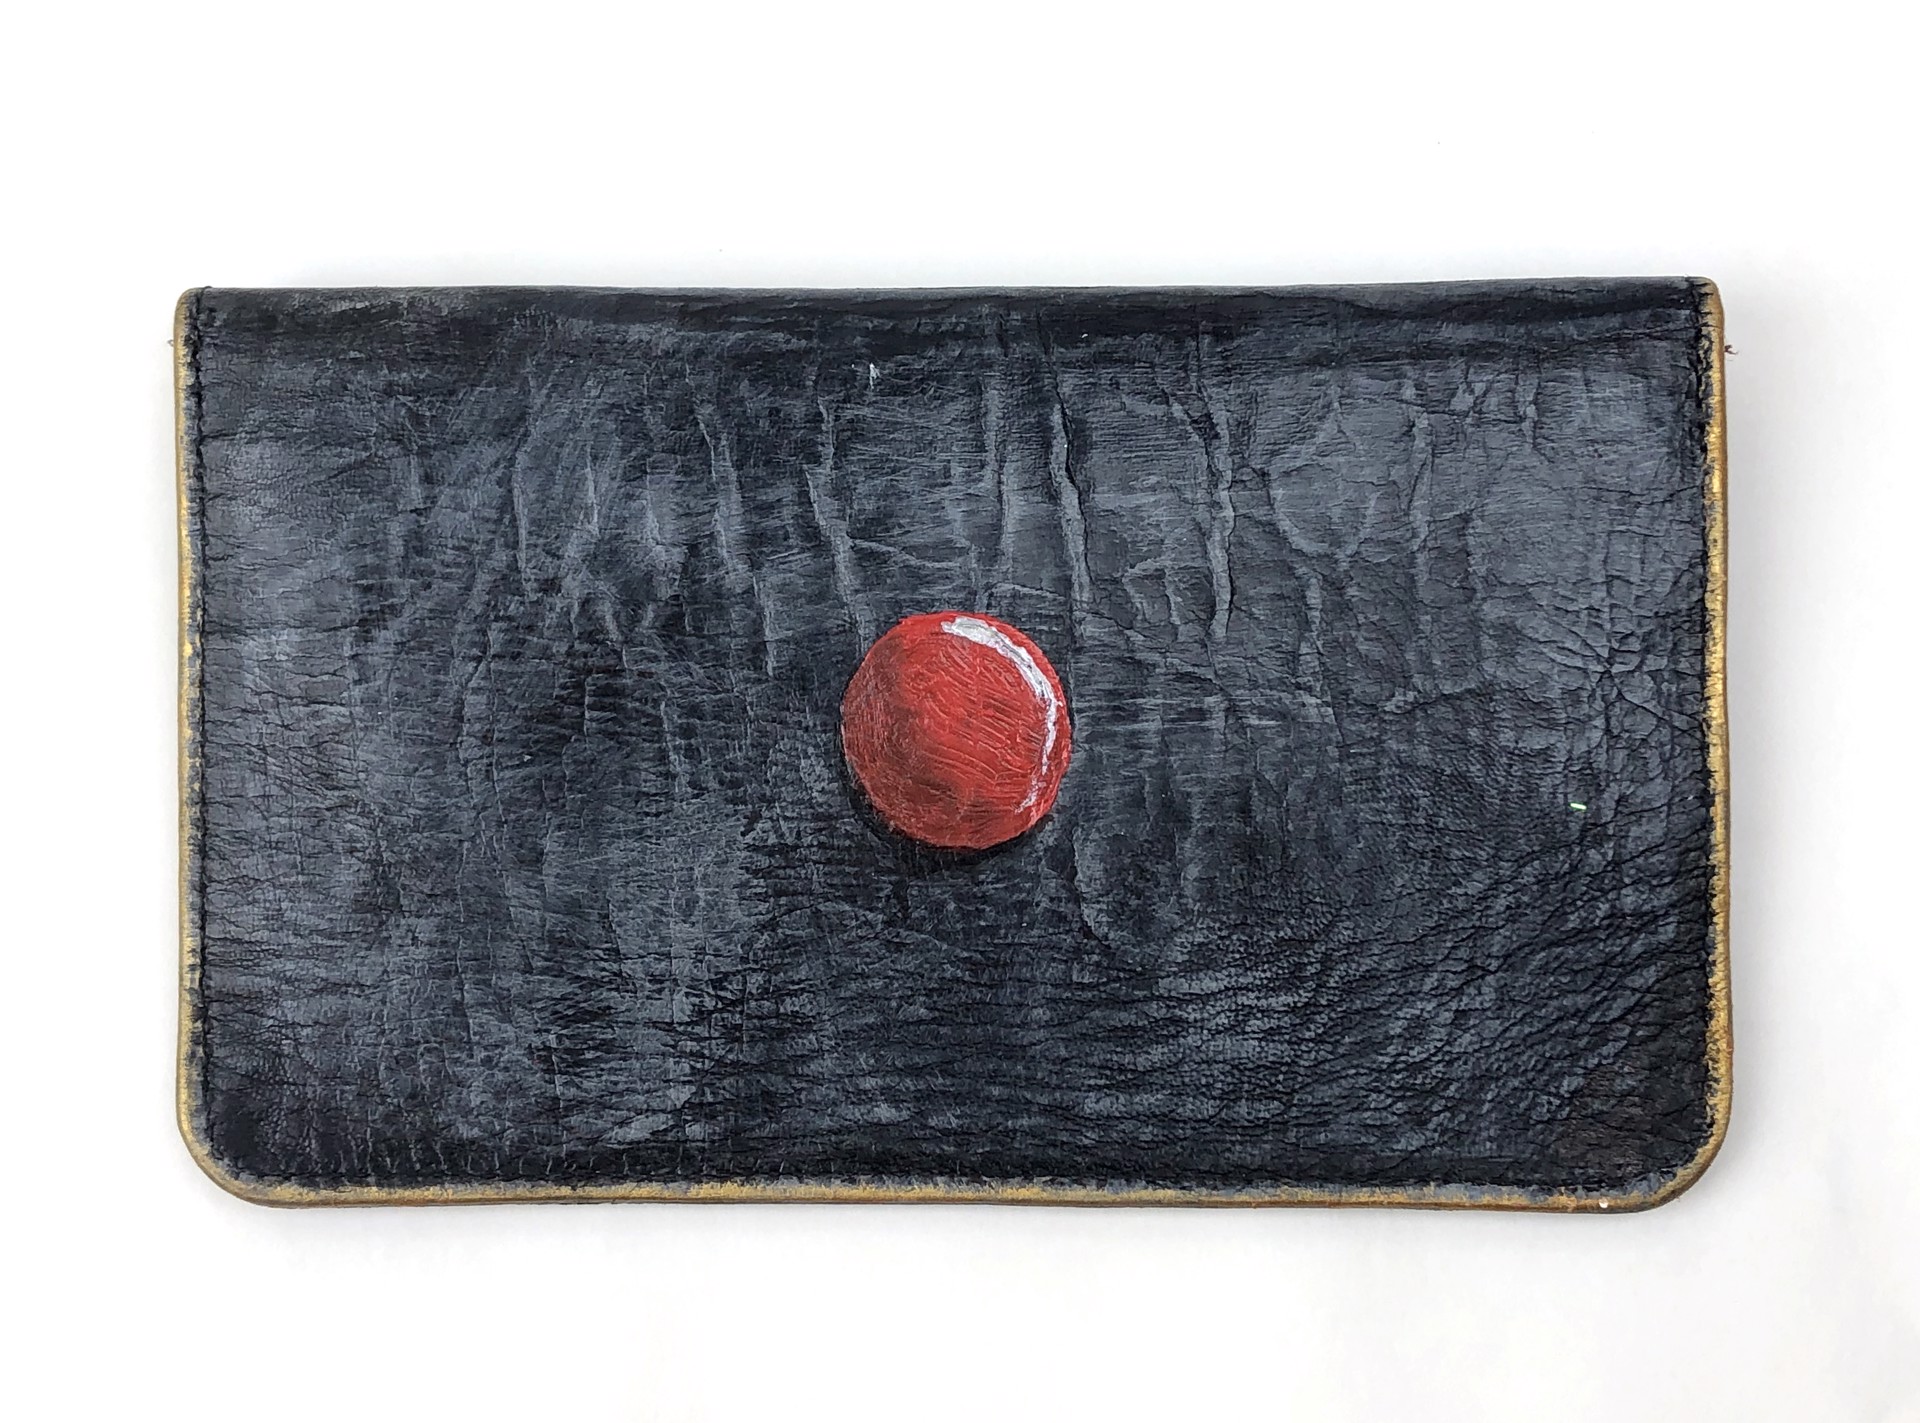 Untitled (Red Button Clutch) by CeeJ Maples